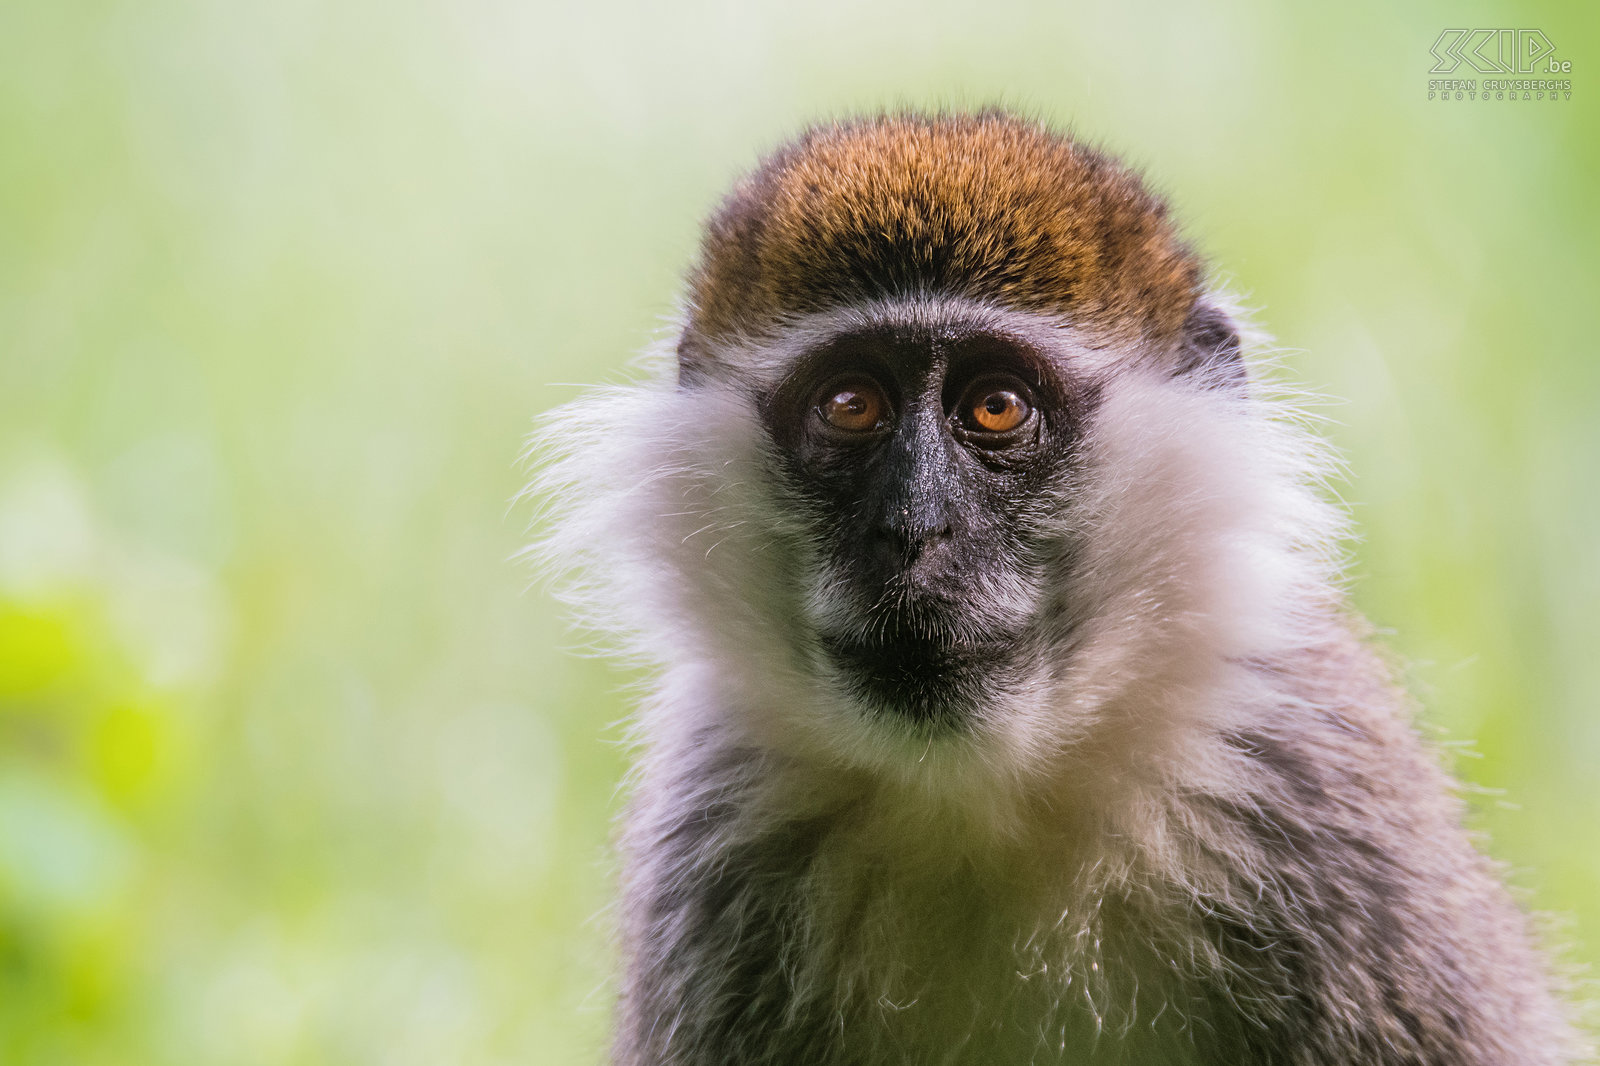 Lake Awassa - Grivet close-up The Grivet (Chlorocebus aethiops) is a species of monkeys that only lives in Sudan, Ethiopia and Eritrea. He is mainly dependent on the Acacia. Stefan Cruysberghs